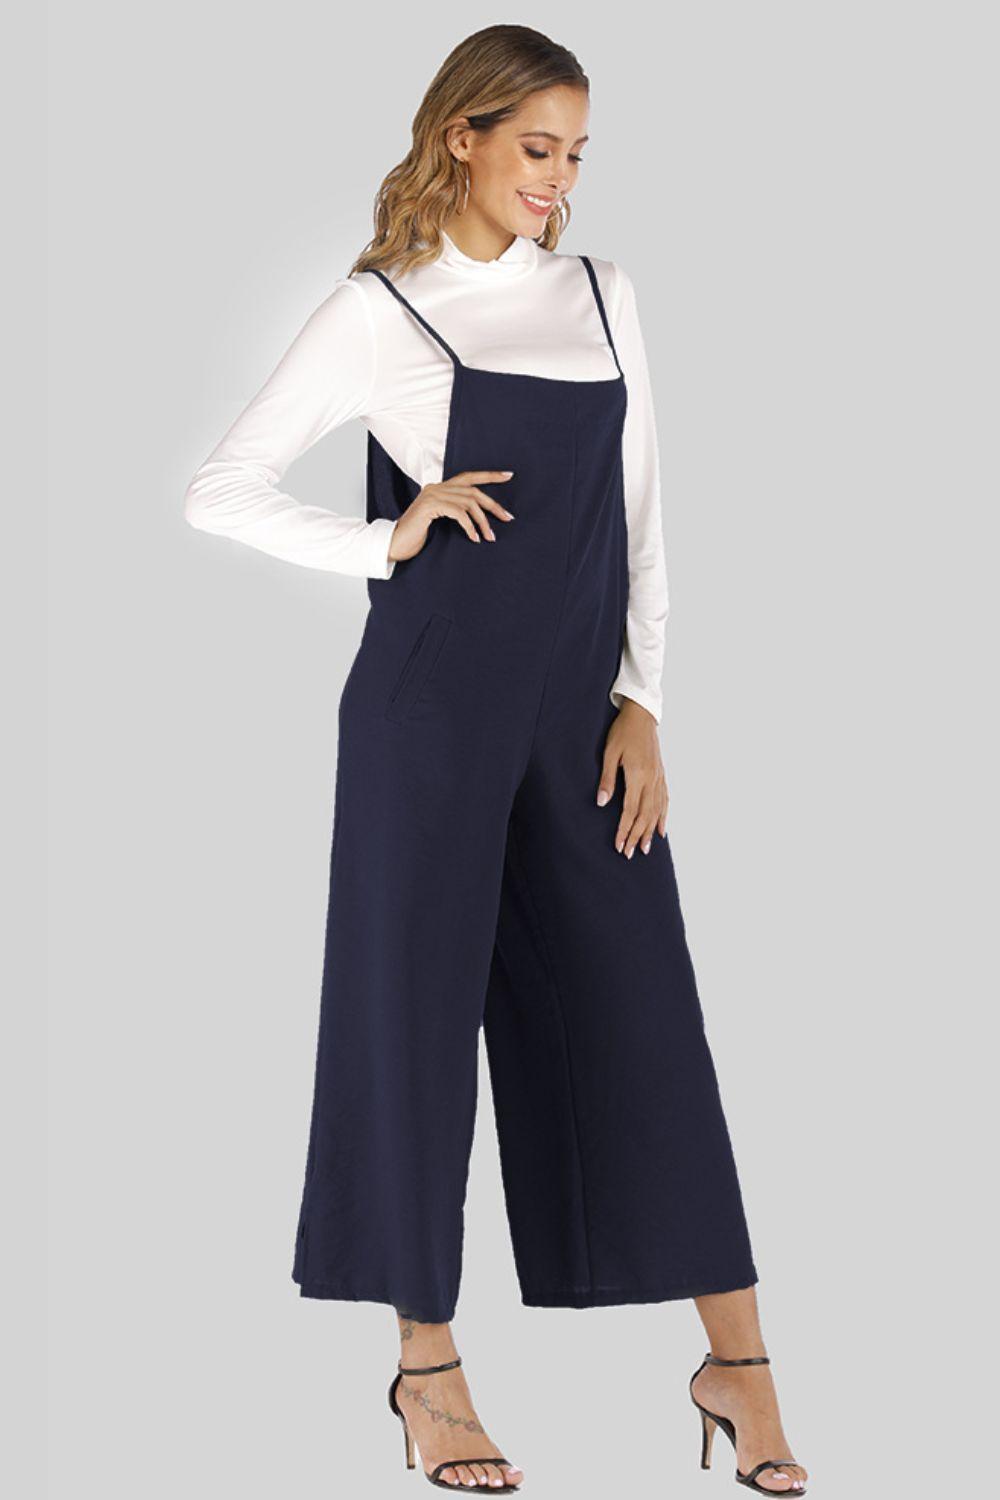 Unflappable Cropped Wide Leg Overalls - MXSTUDIO.COM